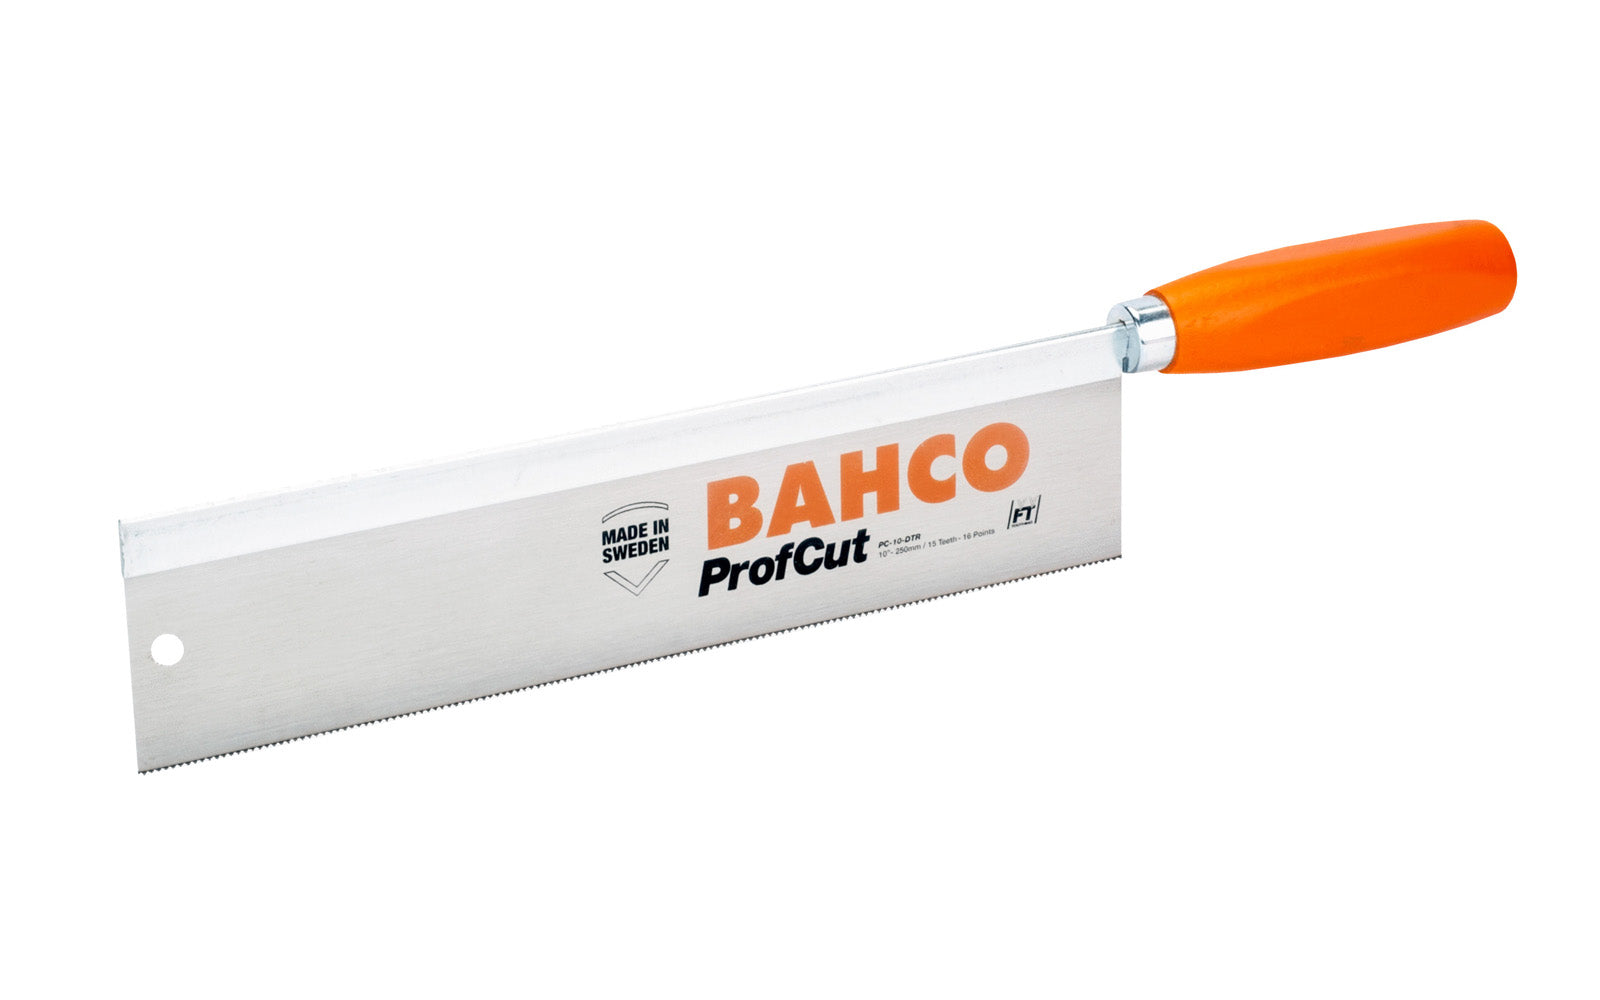 Bahco "ProfCut" 10" Dovetail Saw 15 TPI is ideal for cutting wood, plywood, laminates, timber, plaster, plastic materials. Universal teething, hardpoint teeth for long lasting sharpness.  Made in Sweden. Light steel back for rigidity. 10" (250 mm) cutting edge length. Model PC-10-DTR ~ 7311518263546. Made in Sweden